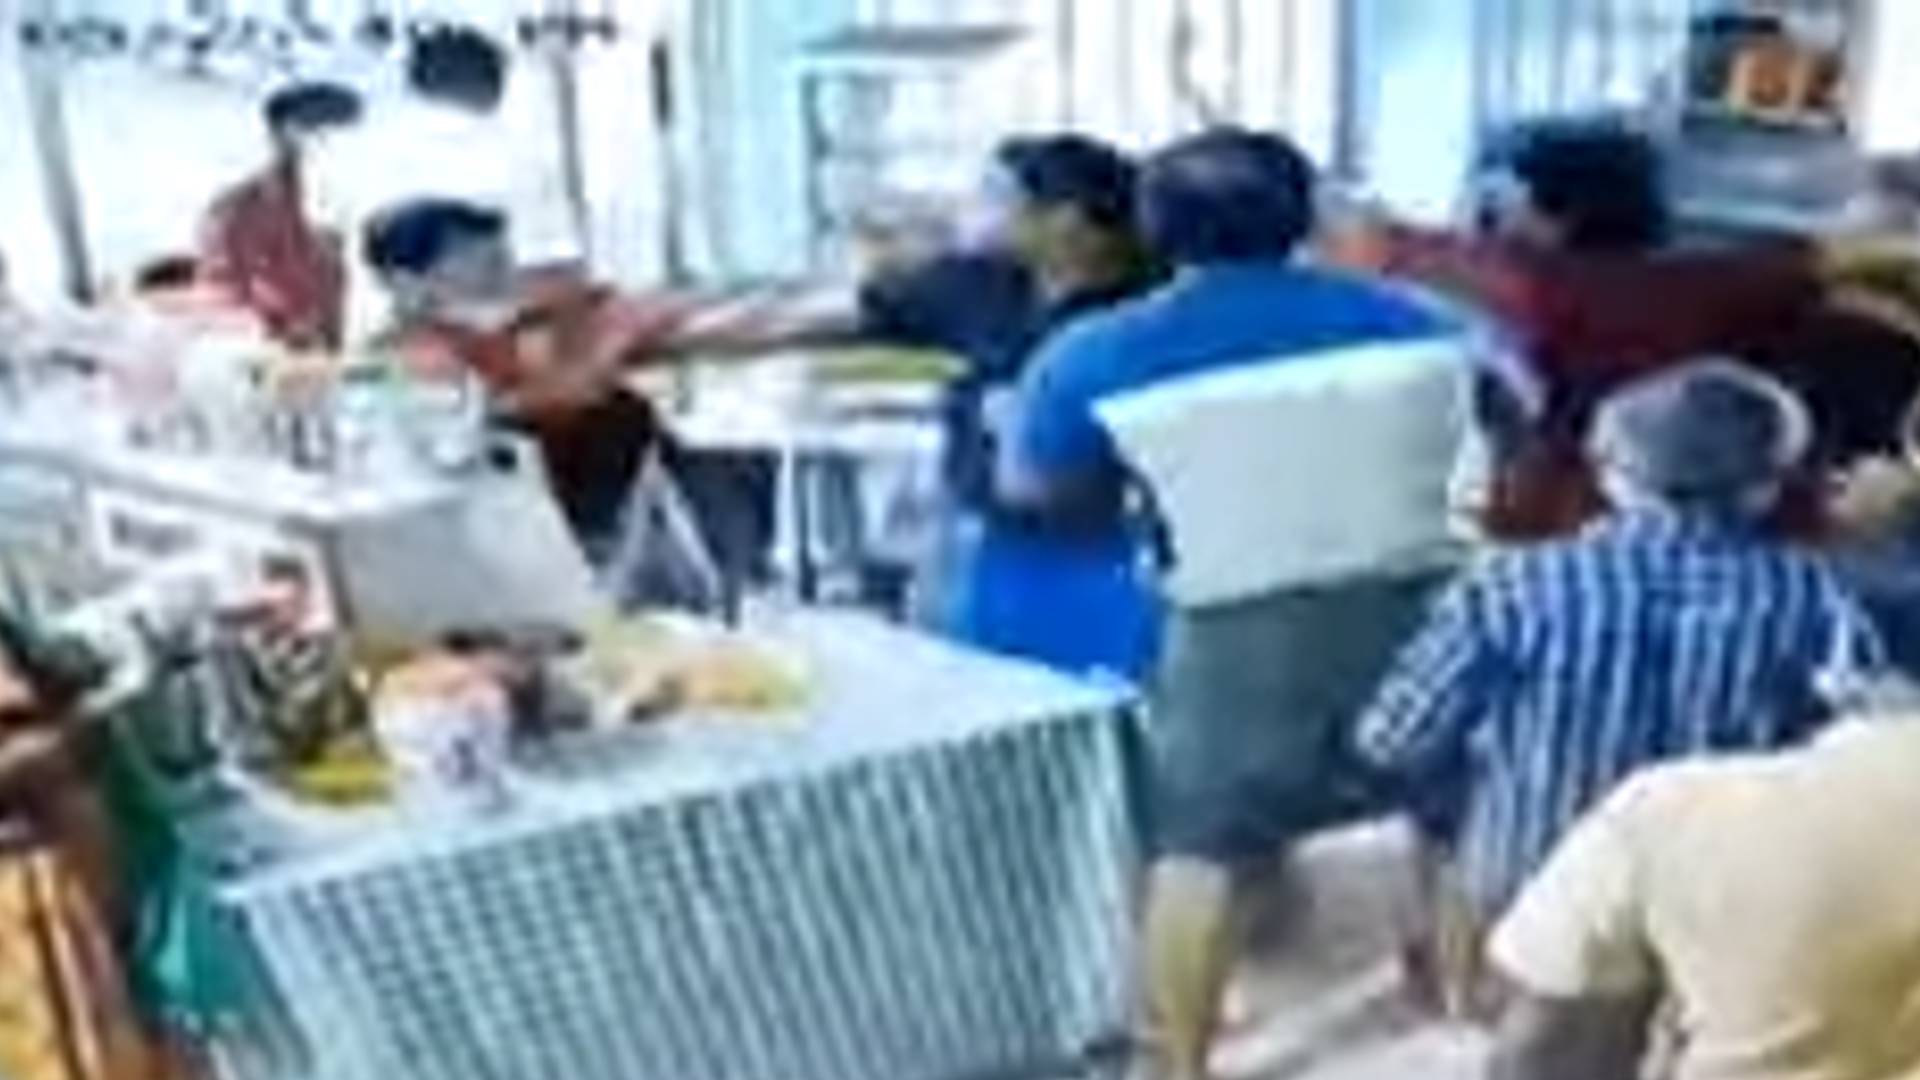 hospital canteen conflict